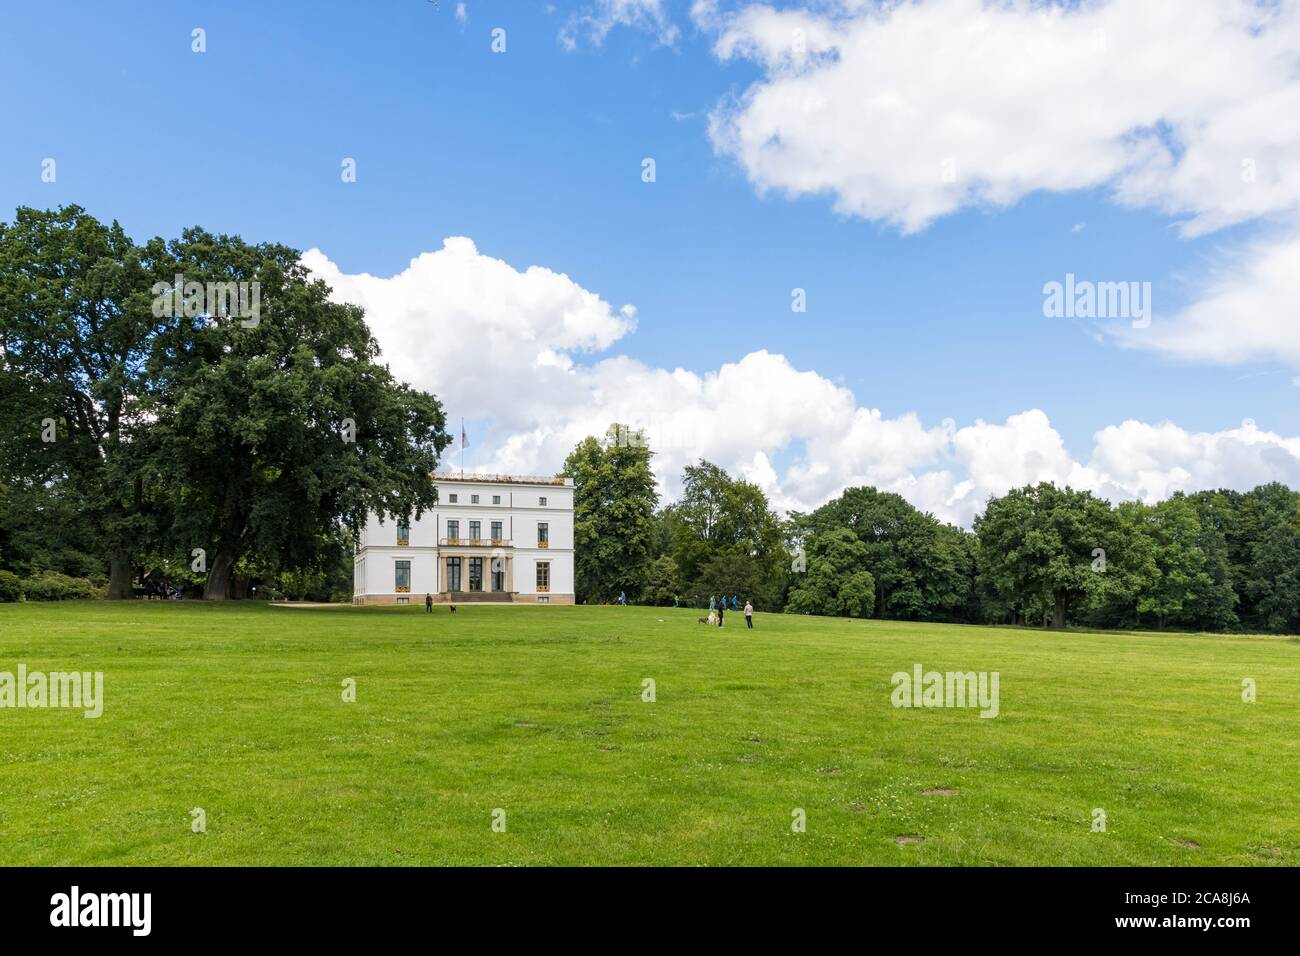 Jenischpark, public park at Hamburg, with Jenisch House, a classicist villa today acting as a museum and exhibition hall. People and dogs on the lawn Stock Photo